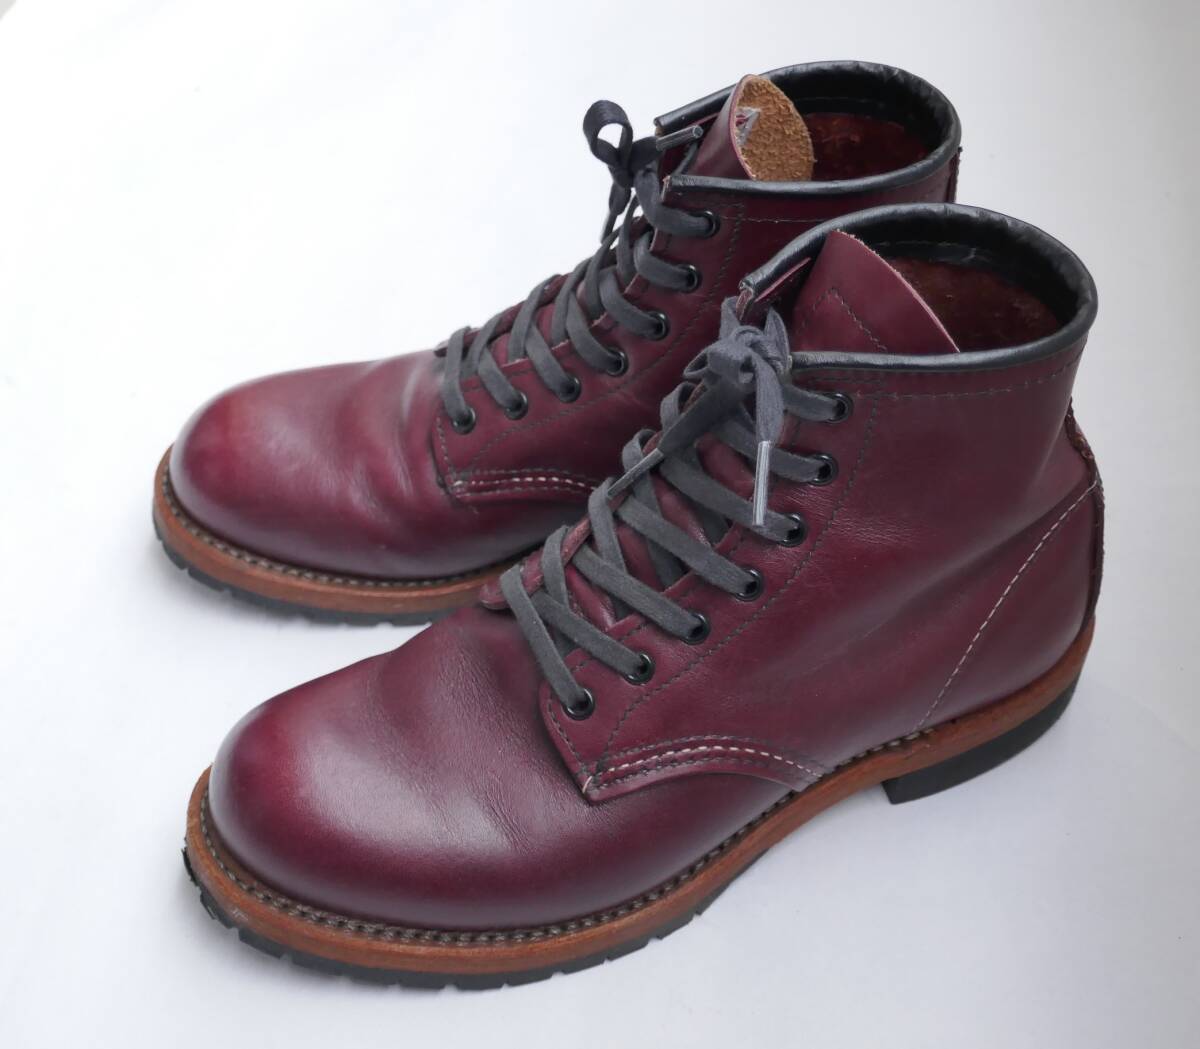 RED WING(レッドウィング) ベックマン ブーツ US 5.5D MADE IN USAの画像10